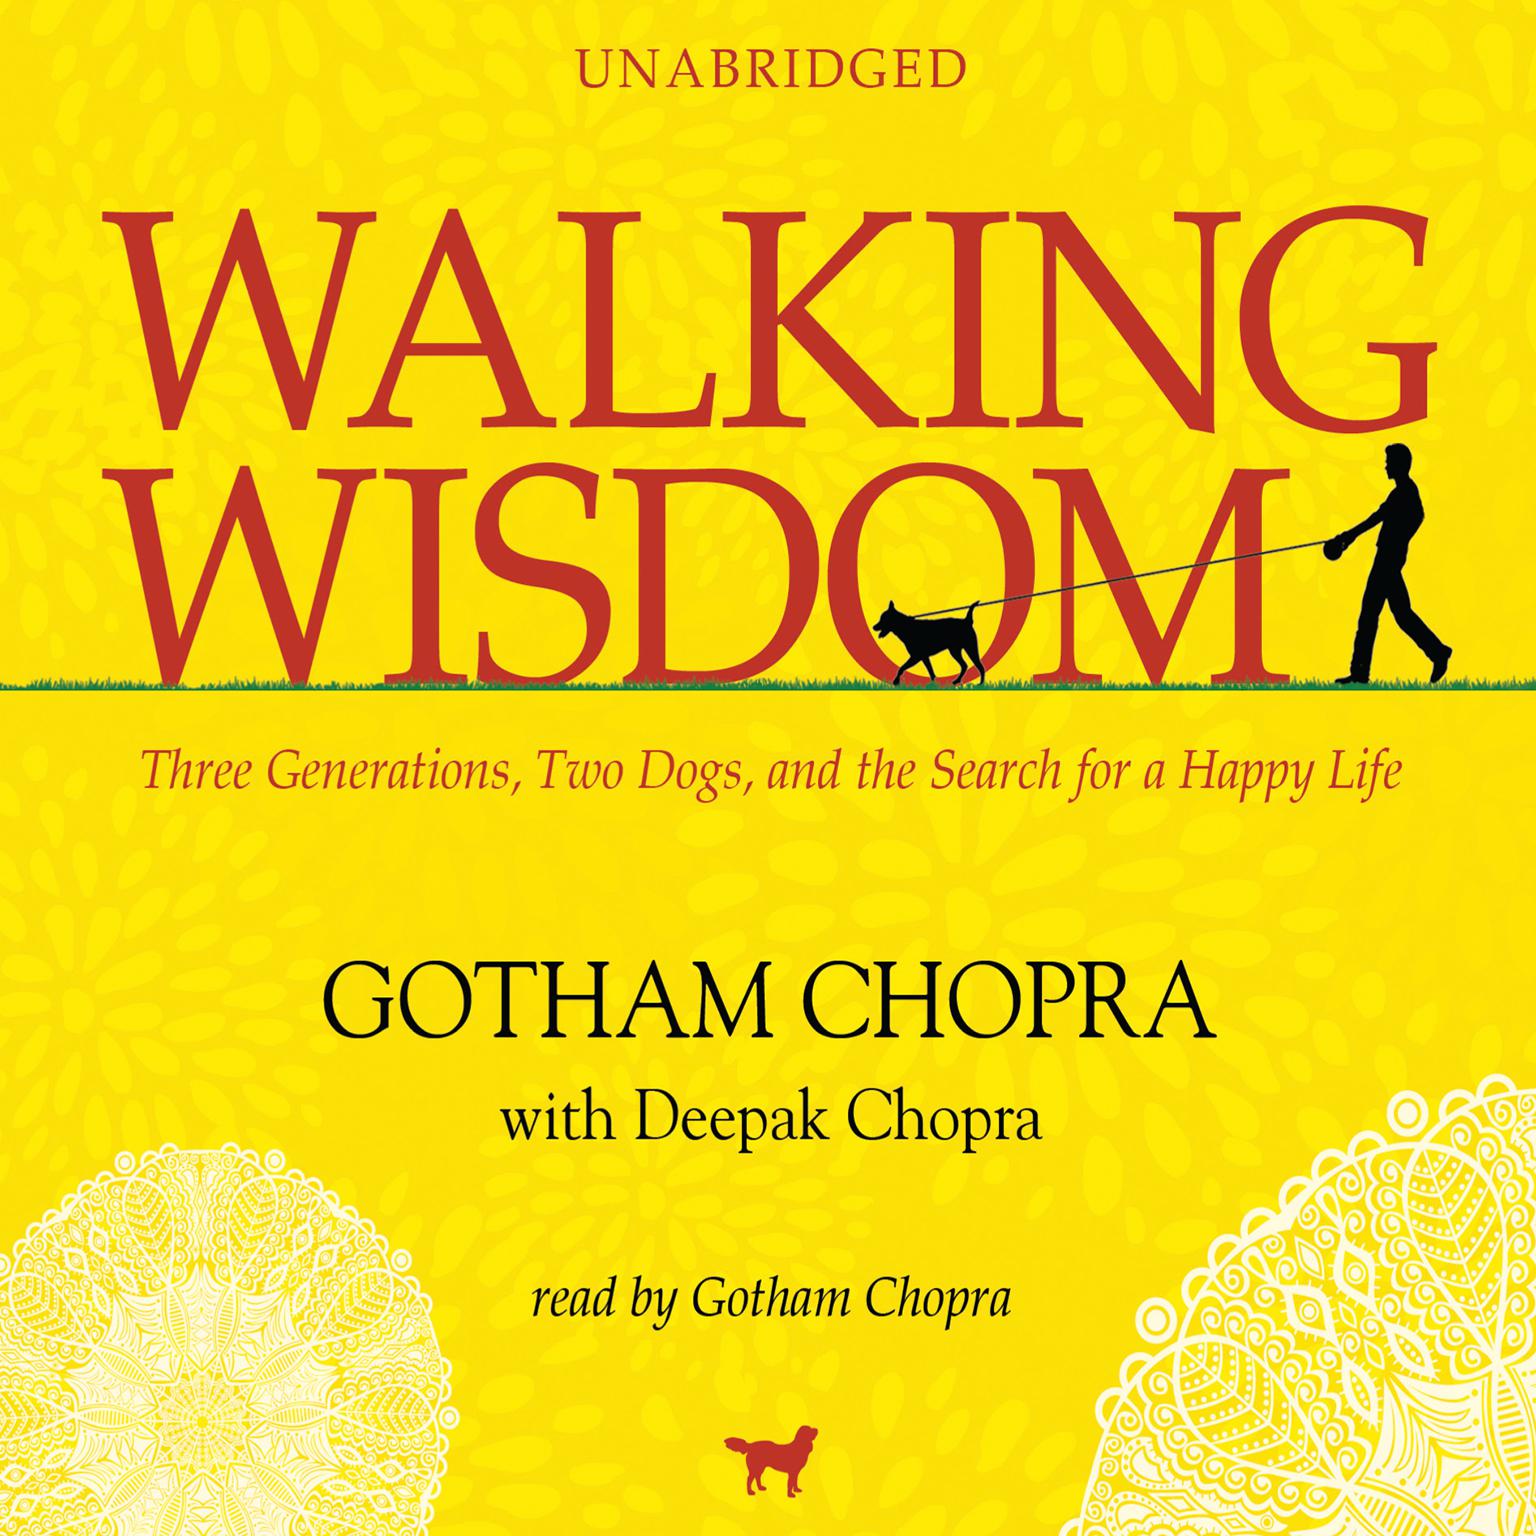 Walking Wisdom: Three Generations, Two Dogs, and the Search for a Happy Life Audiobook, by Gotham Chopra